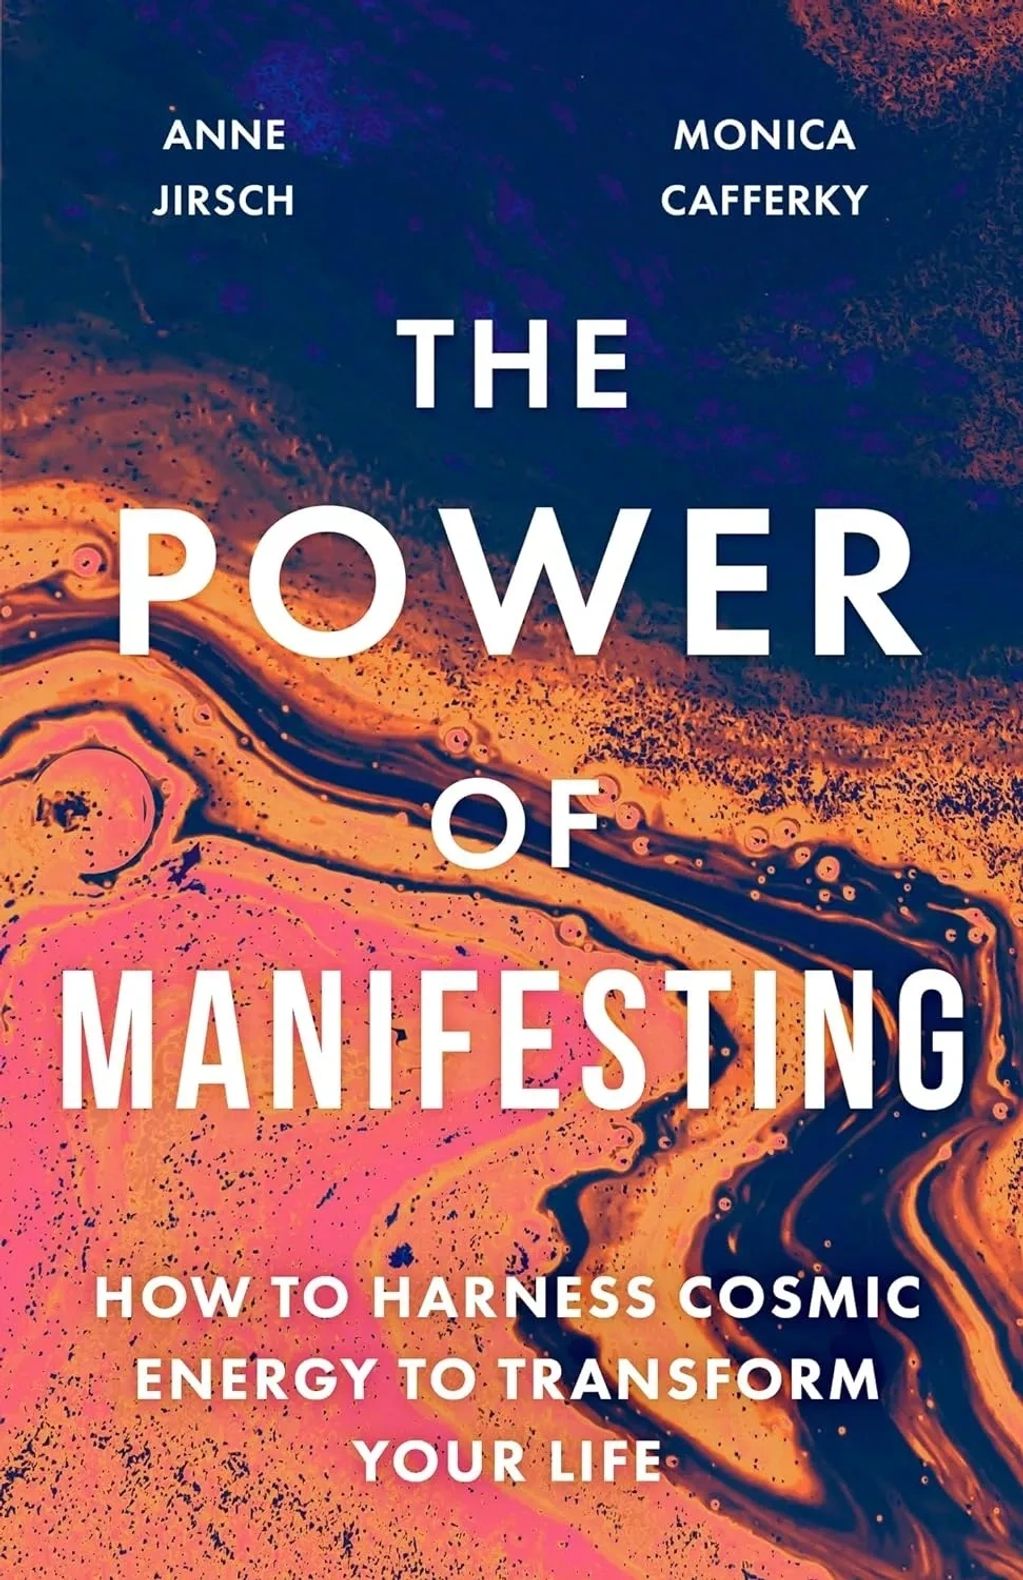 The Power of Manifesting 

